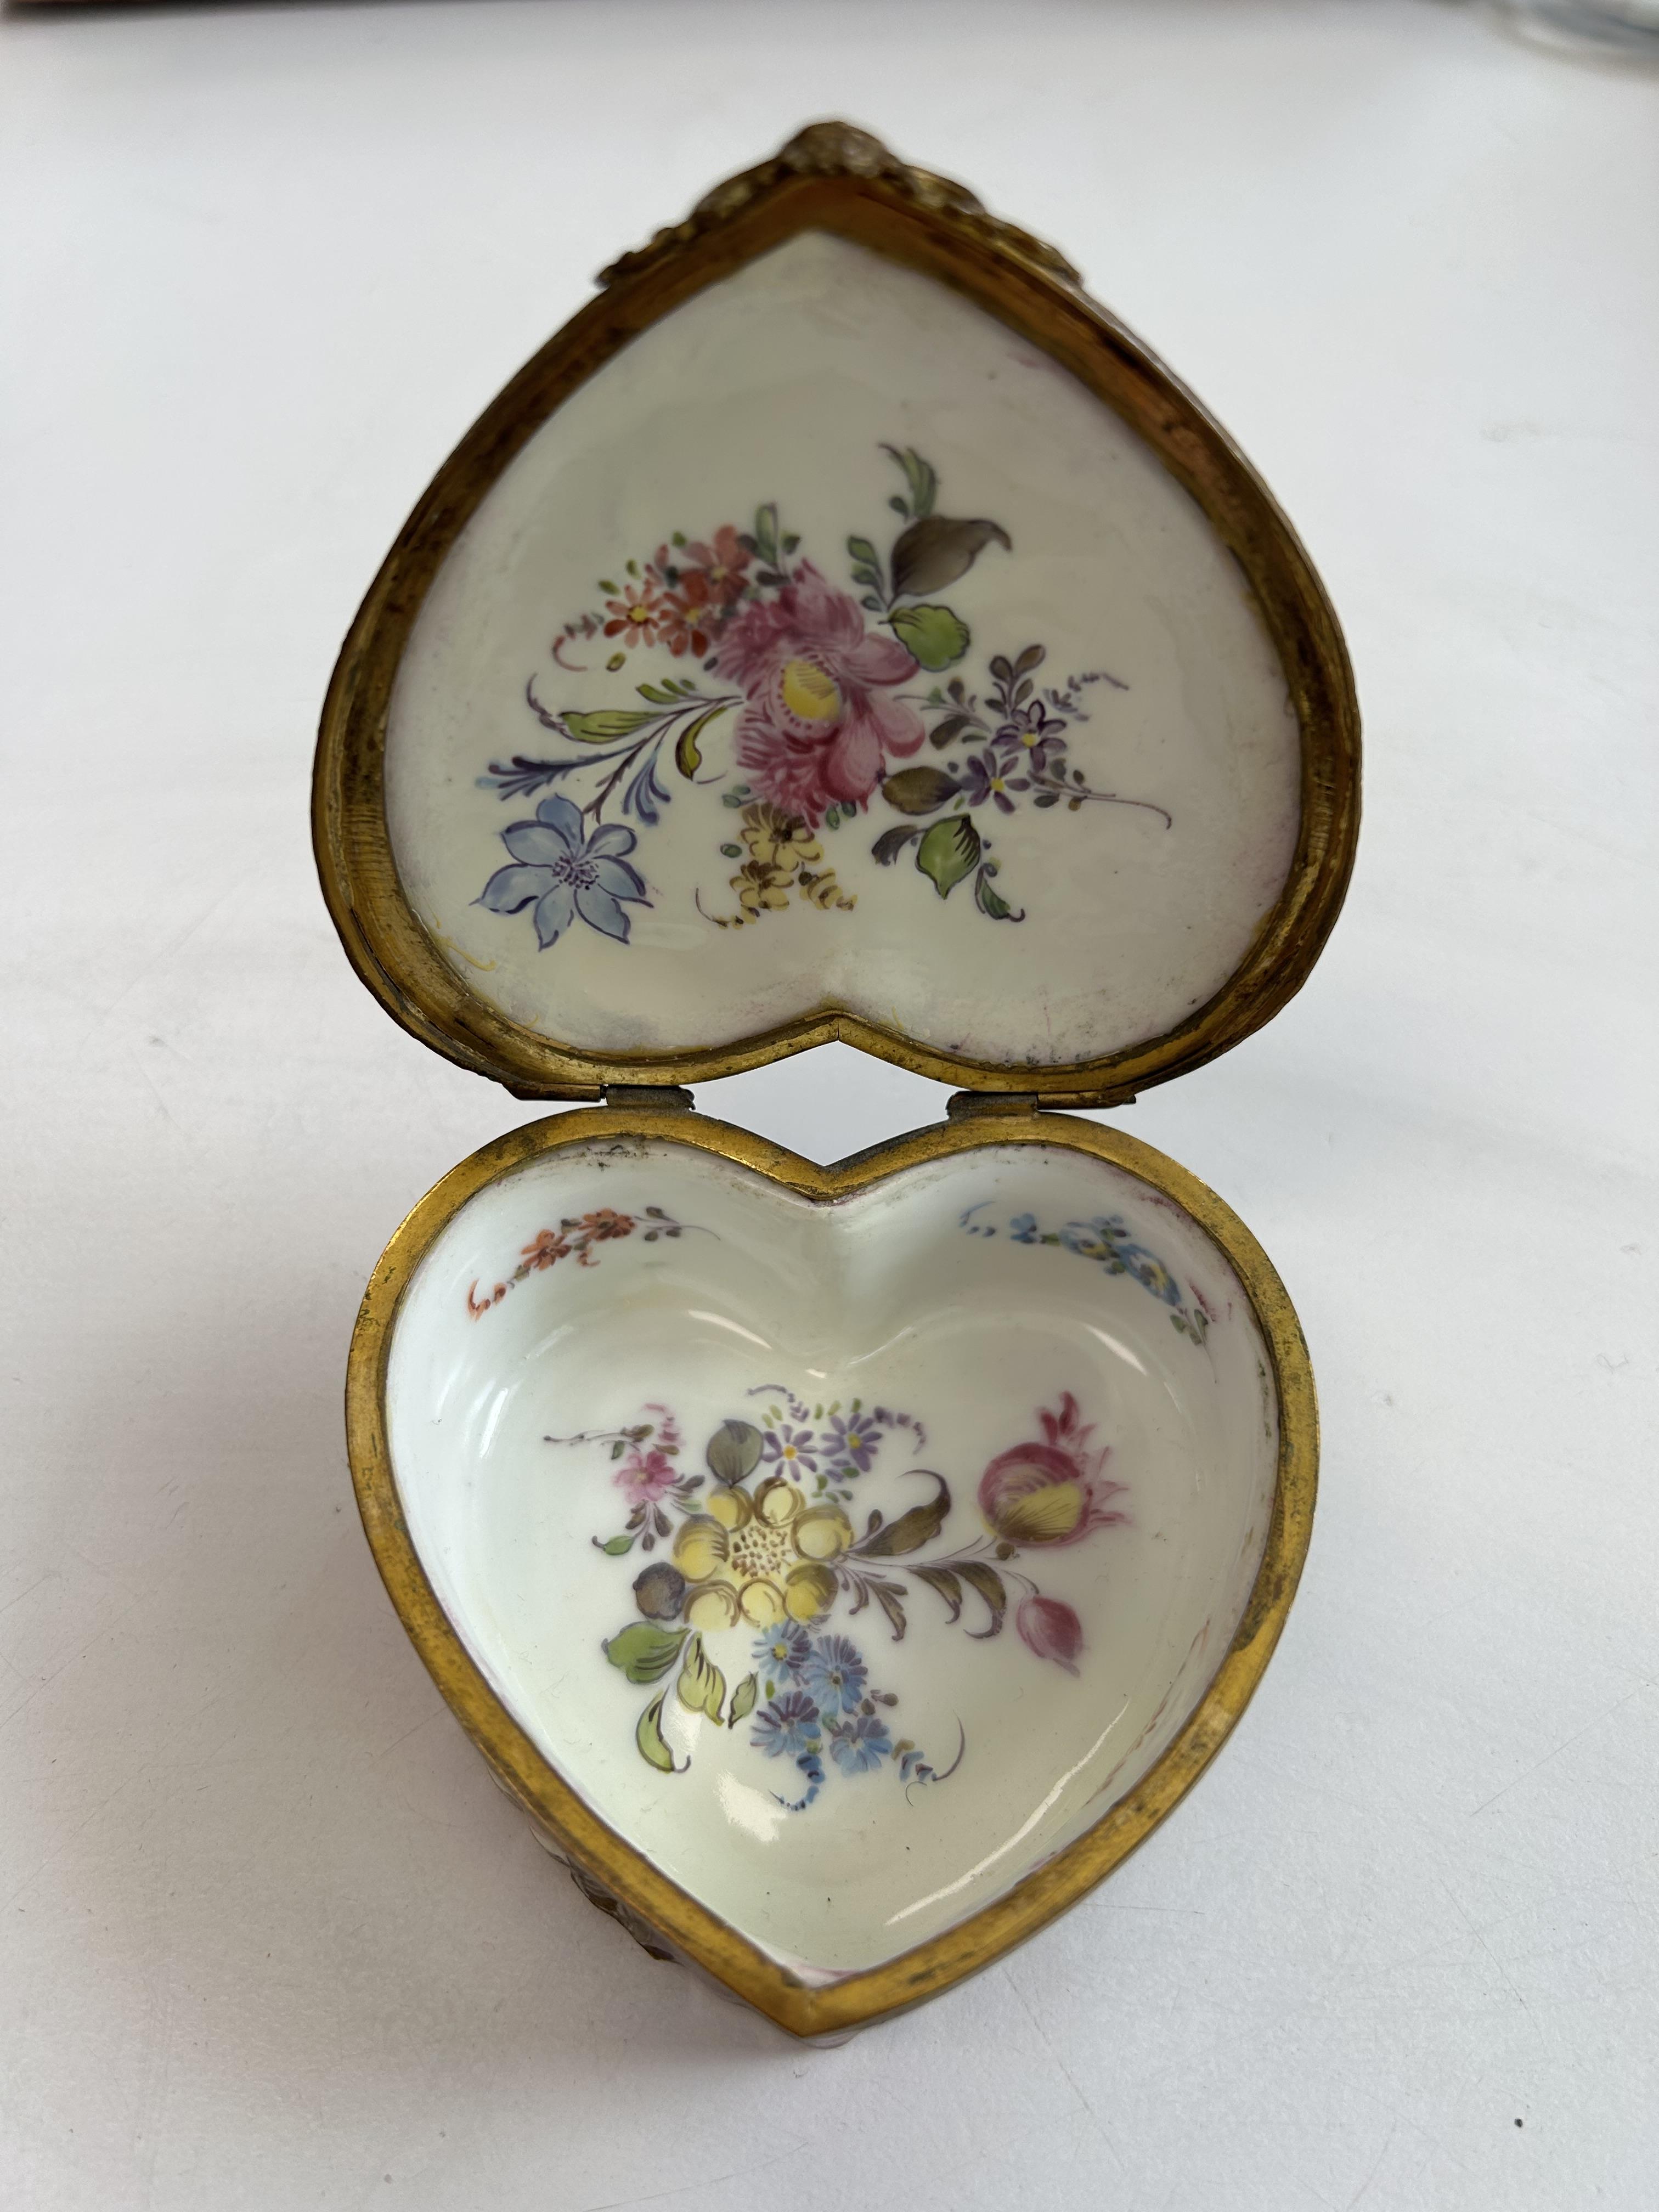 Two late 19th century Sevres style porcelain trinket boxes - Image 2 of 7